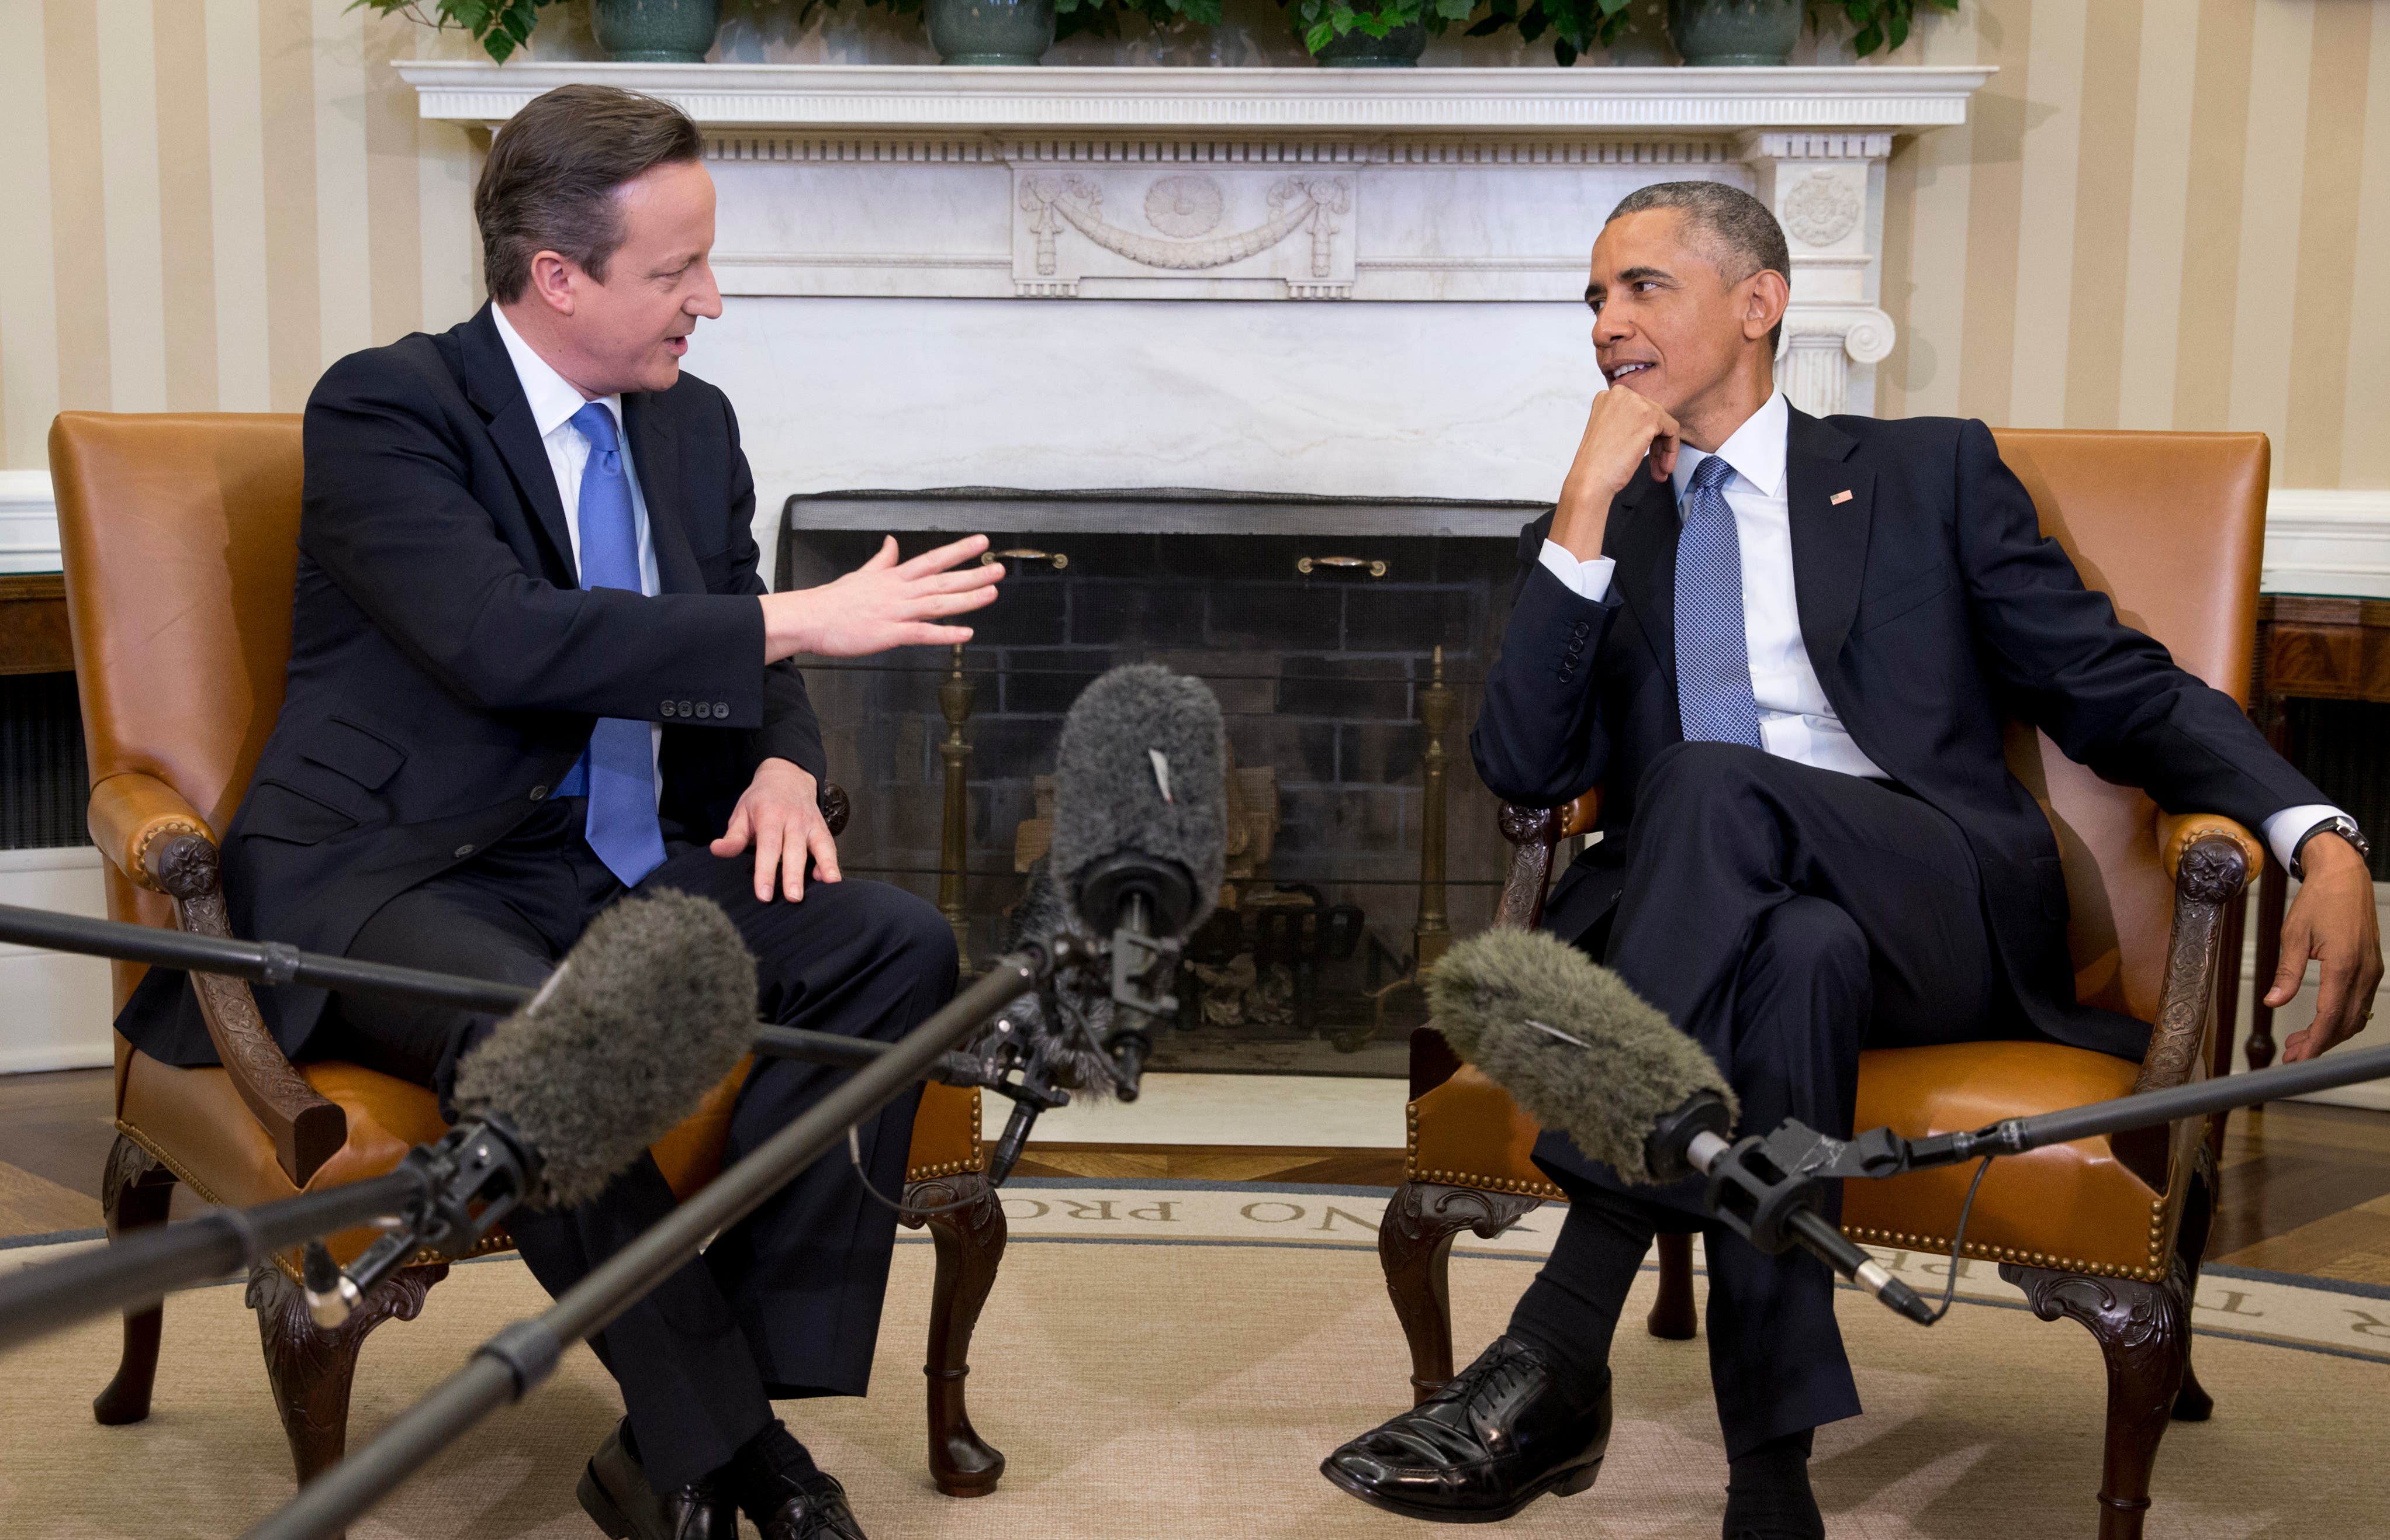 President Barack Obama meets with British Prime Minister David Cameron, Friday, Jan. 16, 2015, in the Oval Office of the White House in Washington. APP 